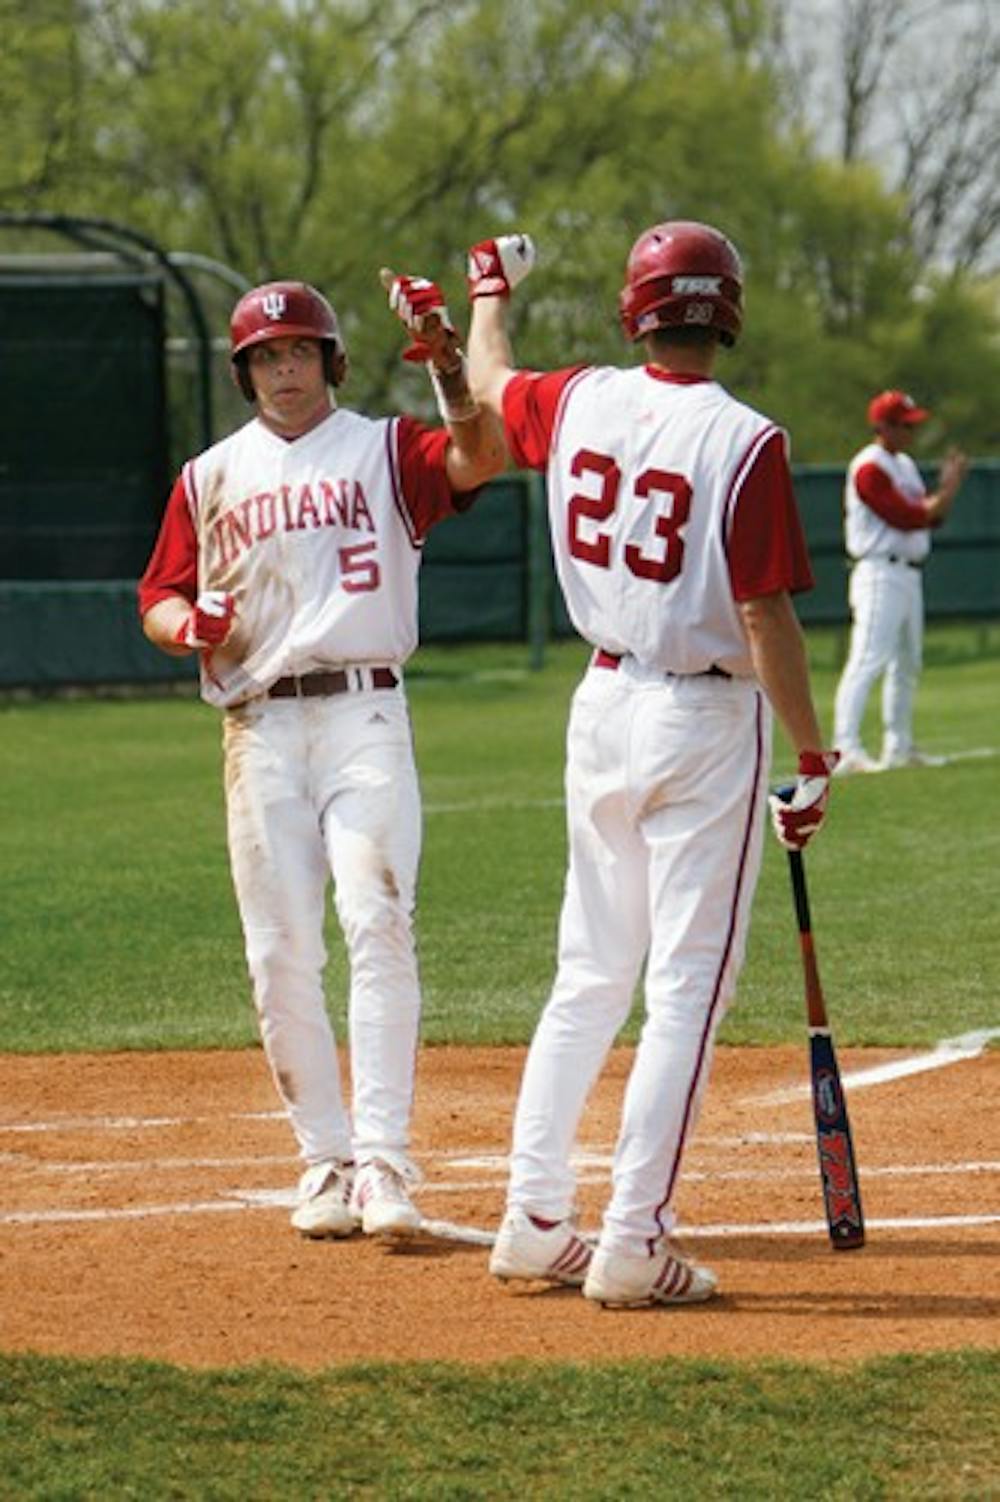 Brandon Foltz / IDS
IU junior outfielder Andrew Means (5) greets teammate Kipp Schutz (23) after scoring a run against Indiana State Wednesday afternoon at Sembower Field. The Hoosiers defeated the the Sycamores 7-2.